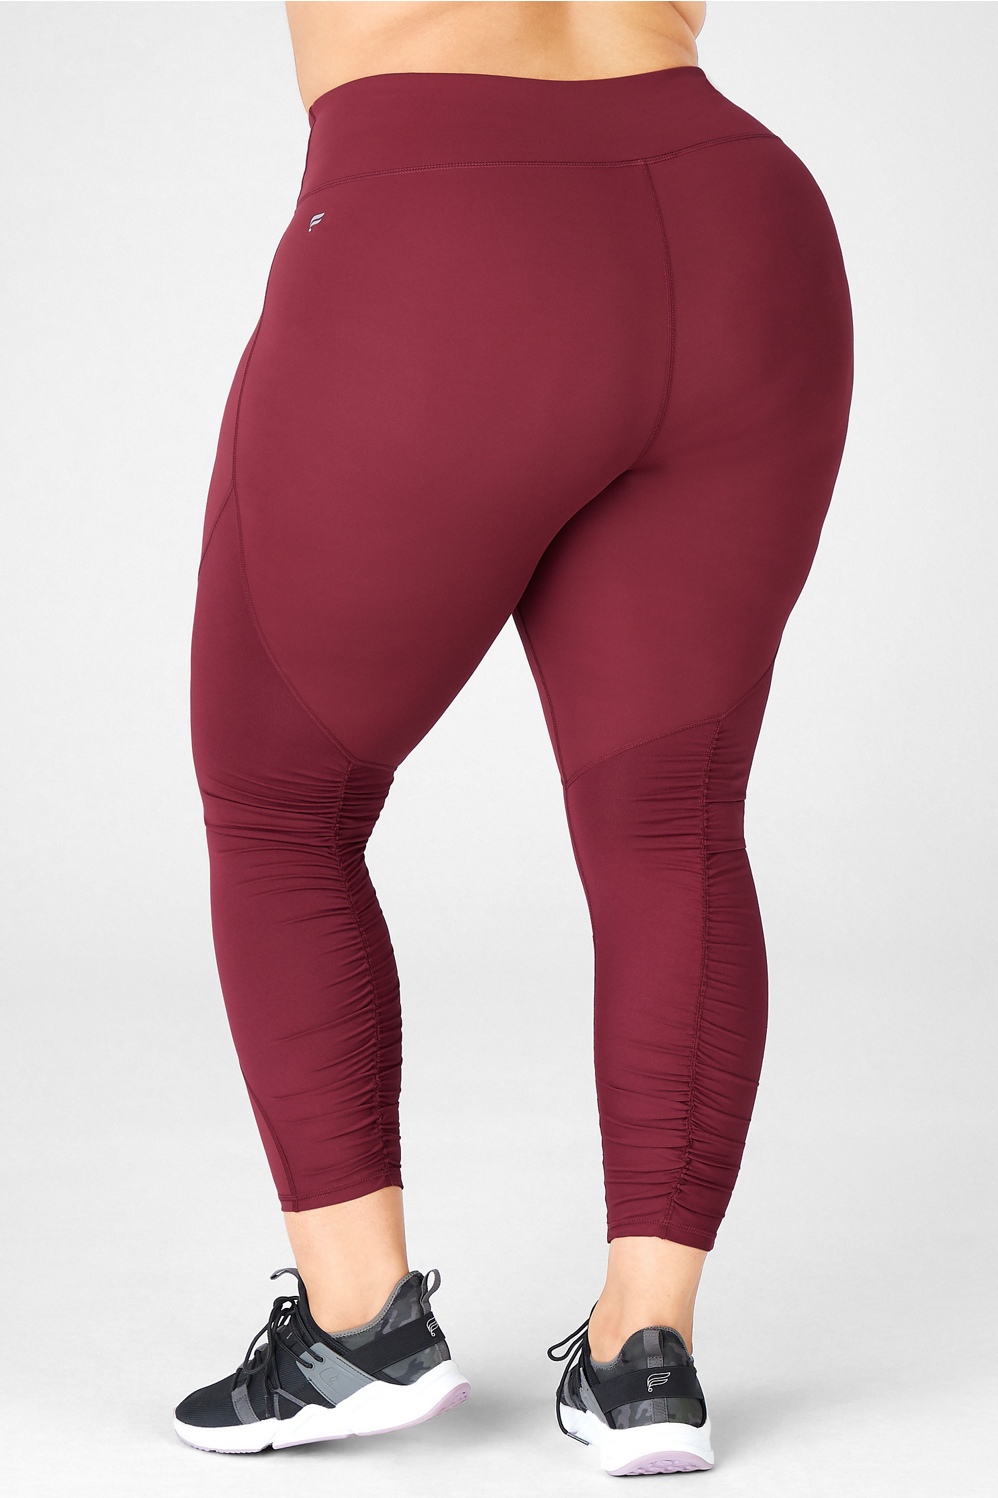 Ladies PLUS size Legging W/Ruched back rear seam/ New Honeycomb textured  (3XL, Bric Red)